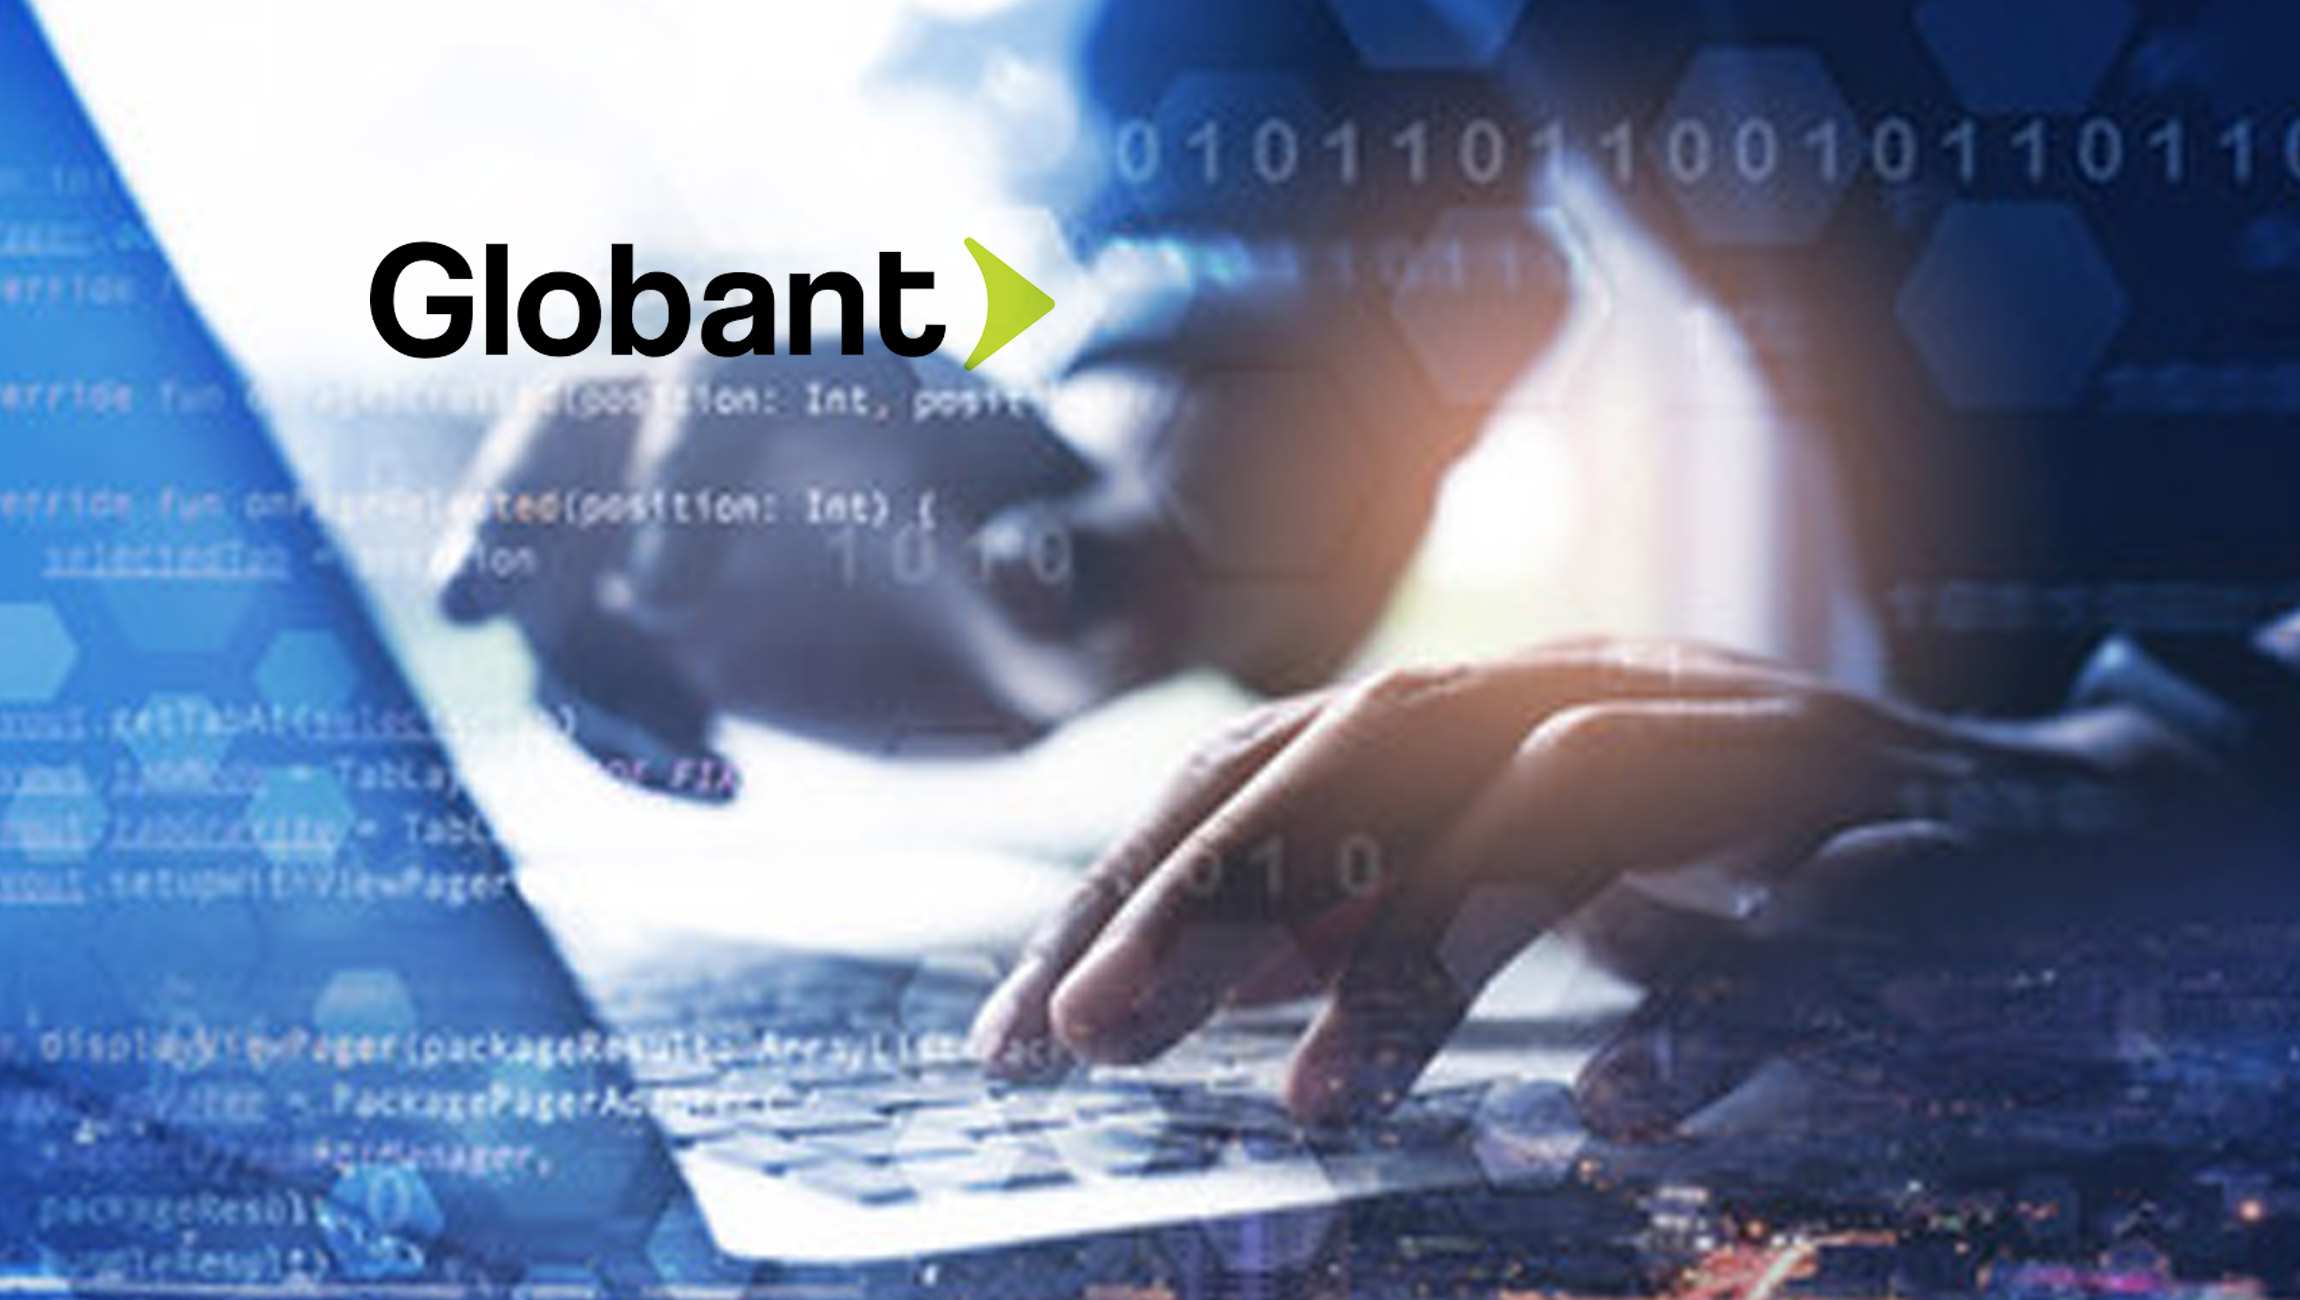 Globant Introduces its Fast Code Studio to Disrupt the Status Quo of Software Development